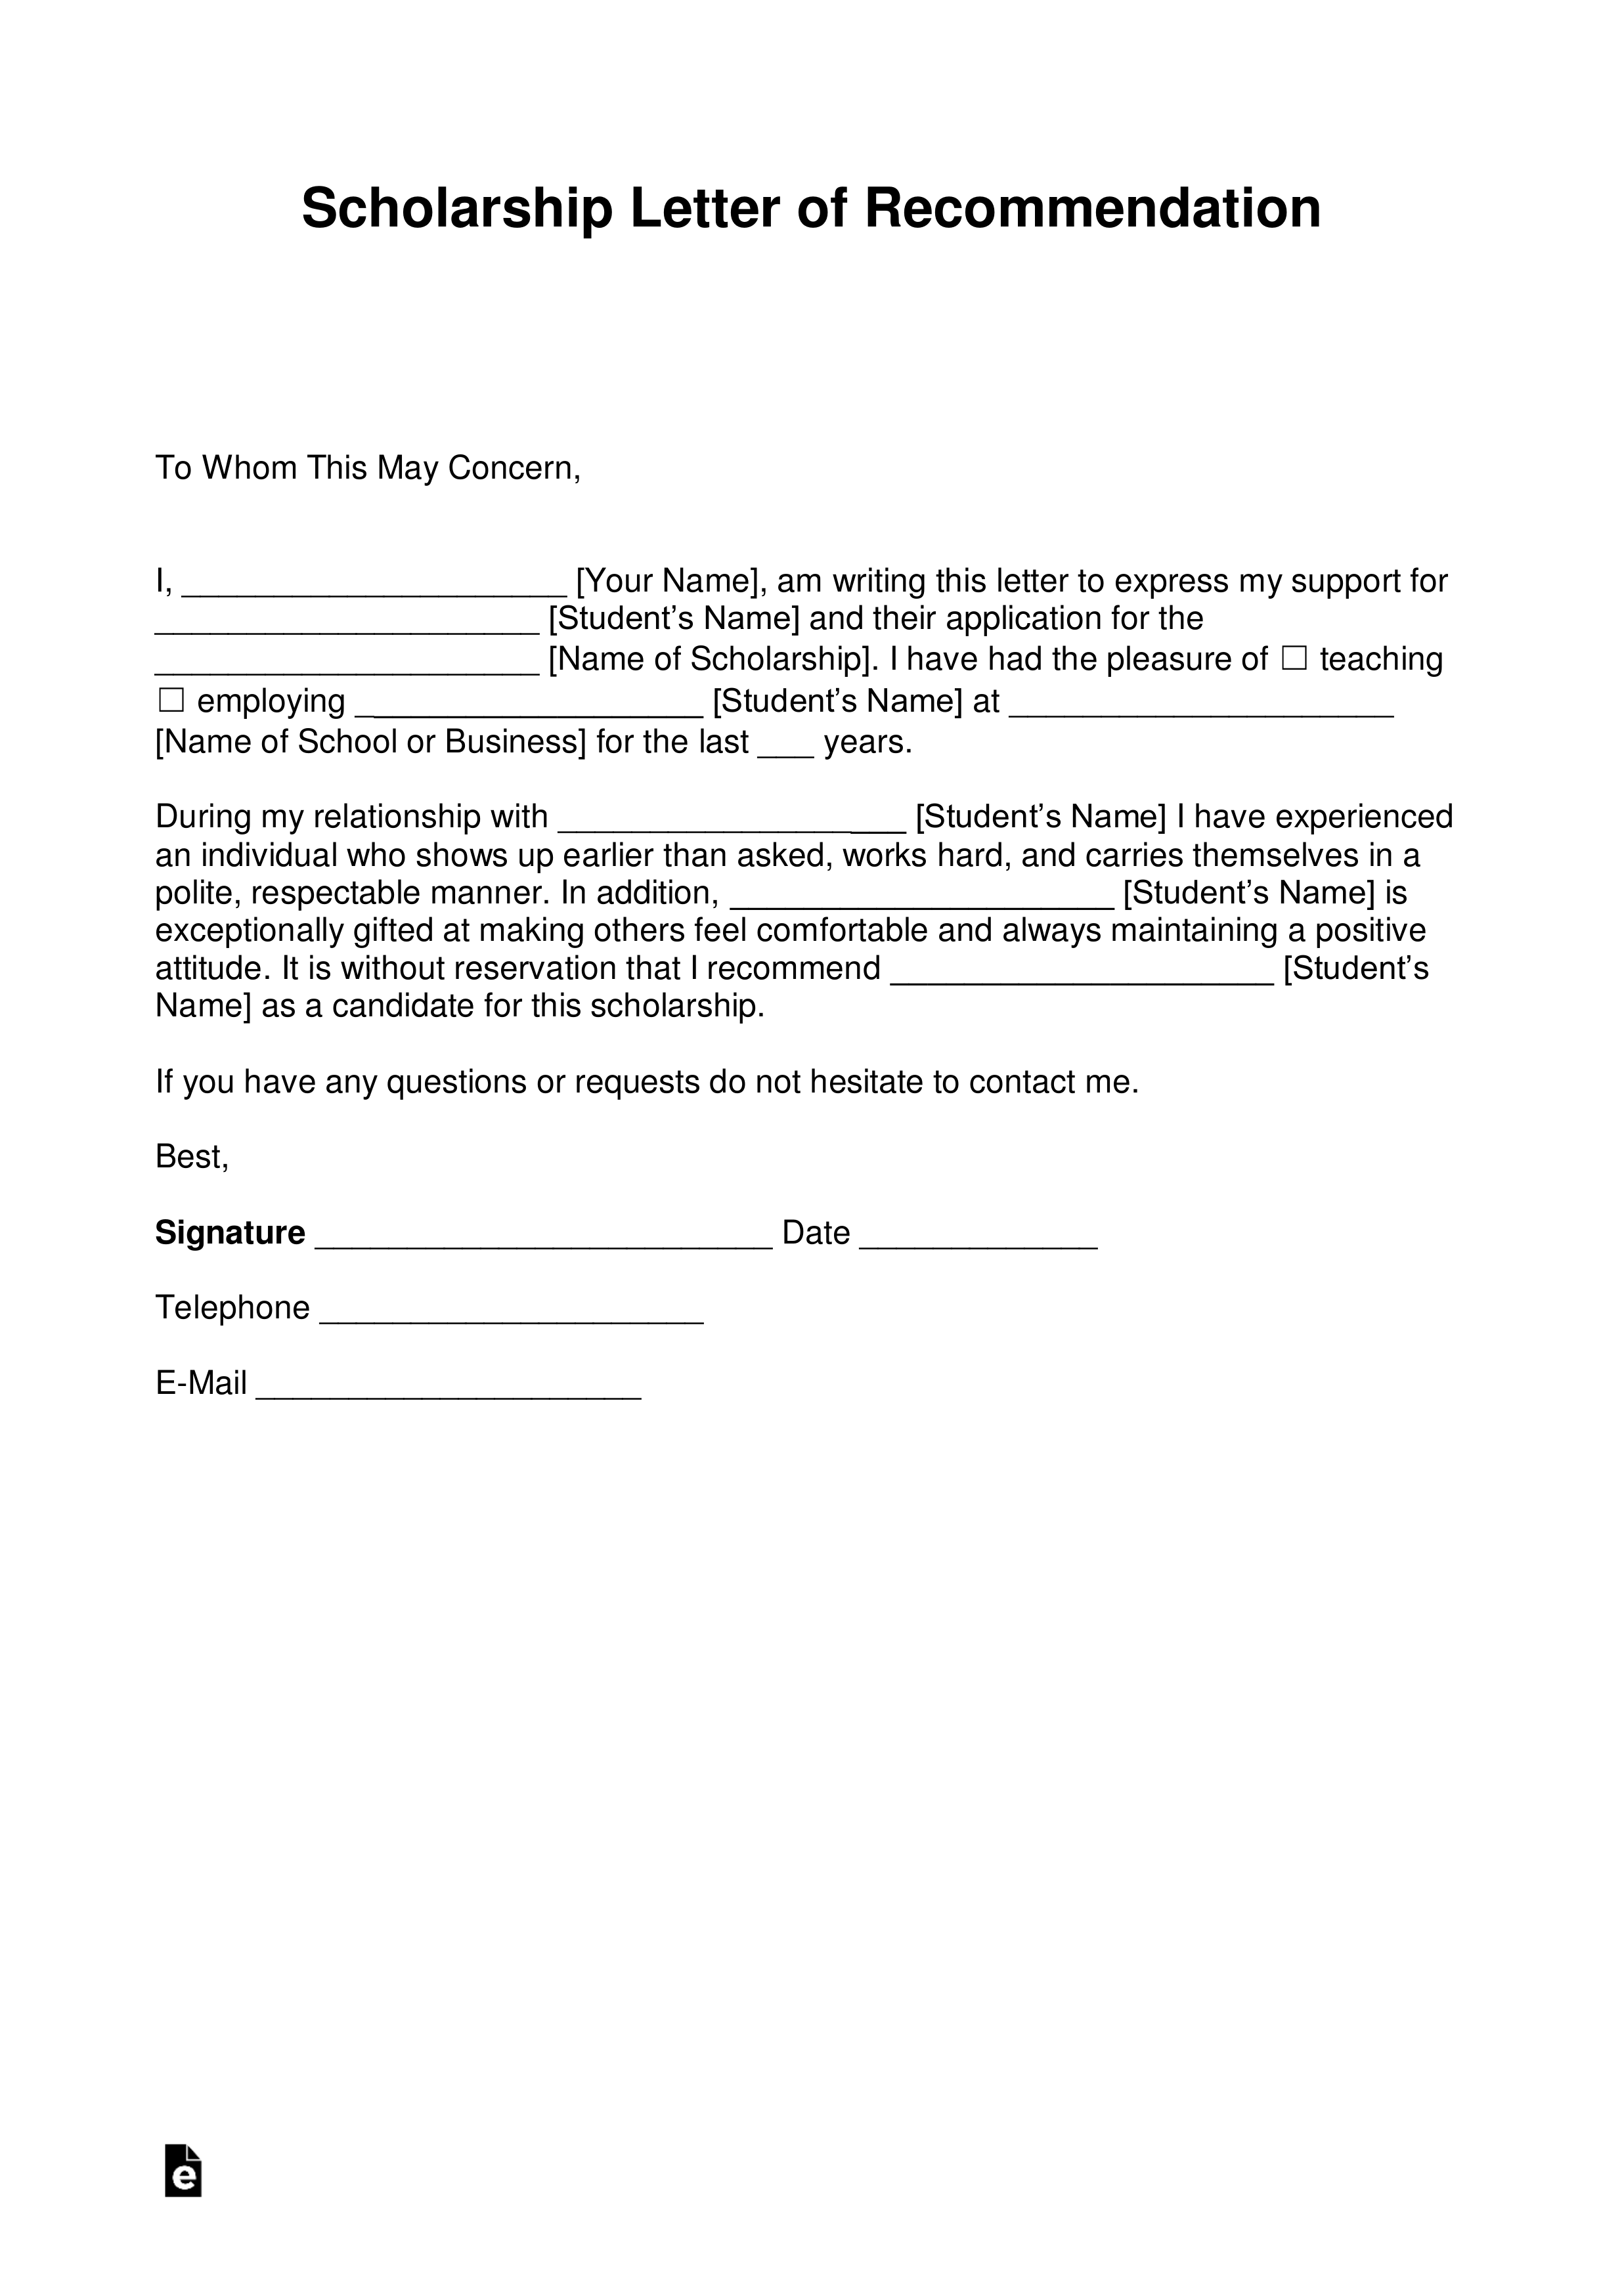 Simple Recommendation Letter For Student from eforms.com